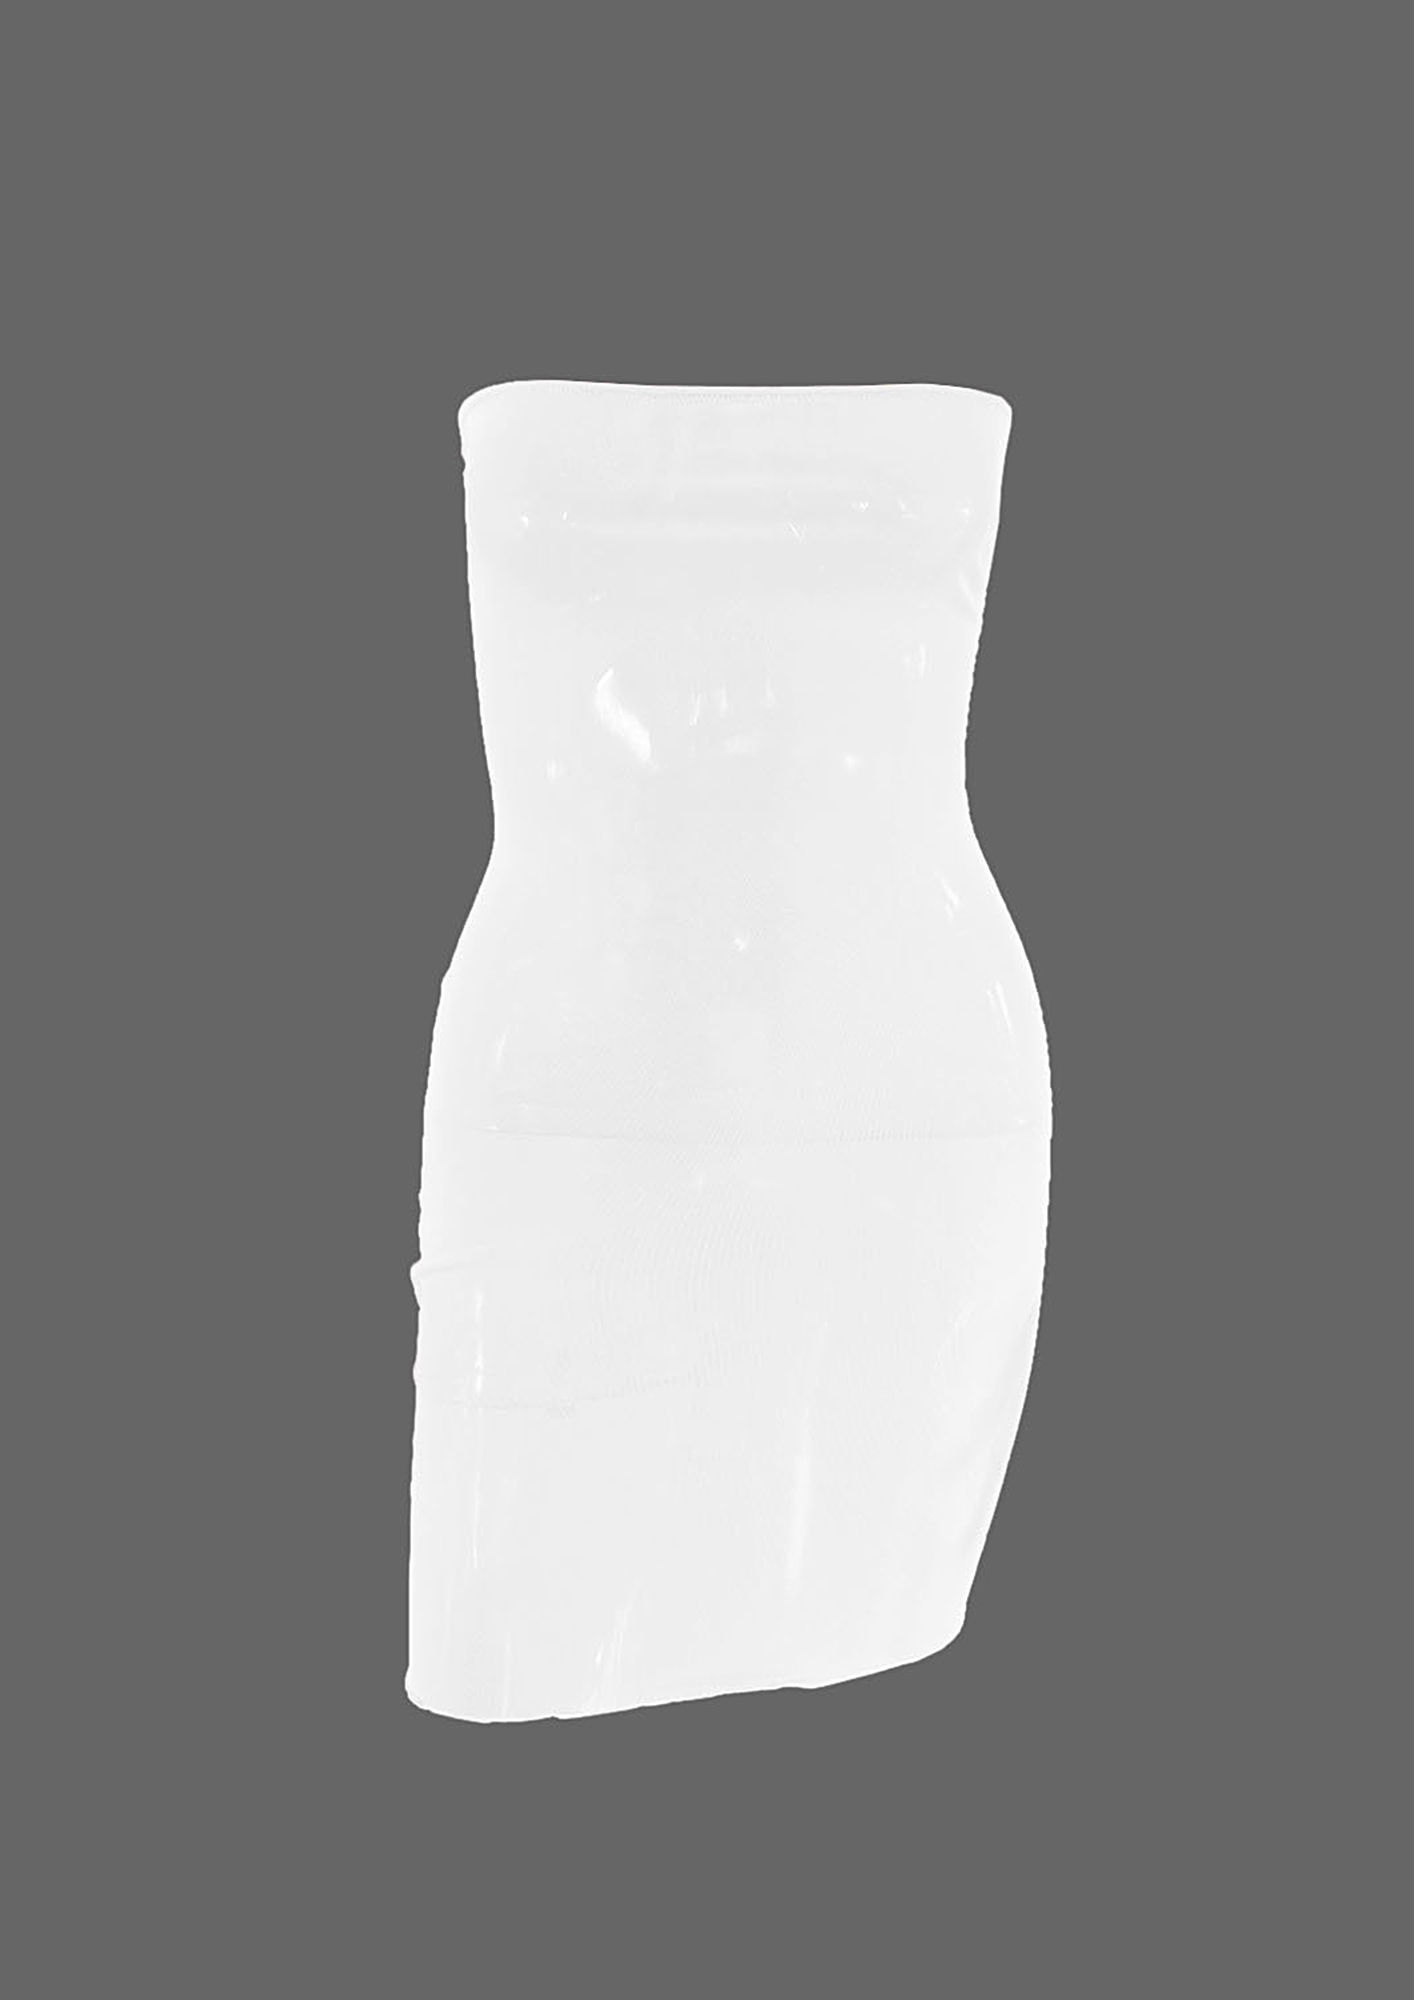 Buy Invisible Body Suit Online In India -  India